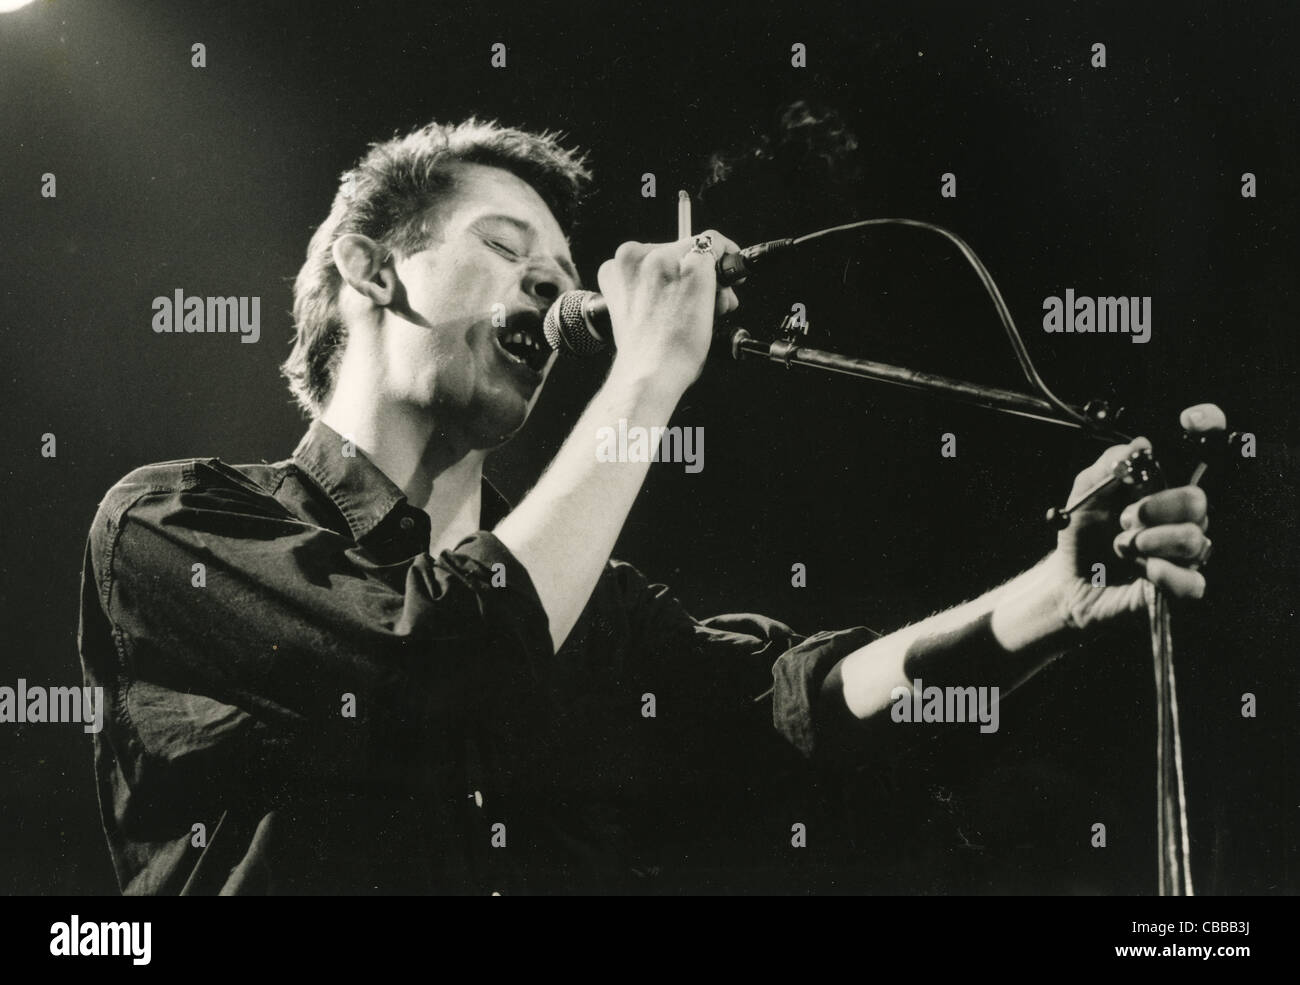 The Pogues announce 30th anniversary show - UNCUT